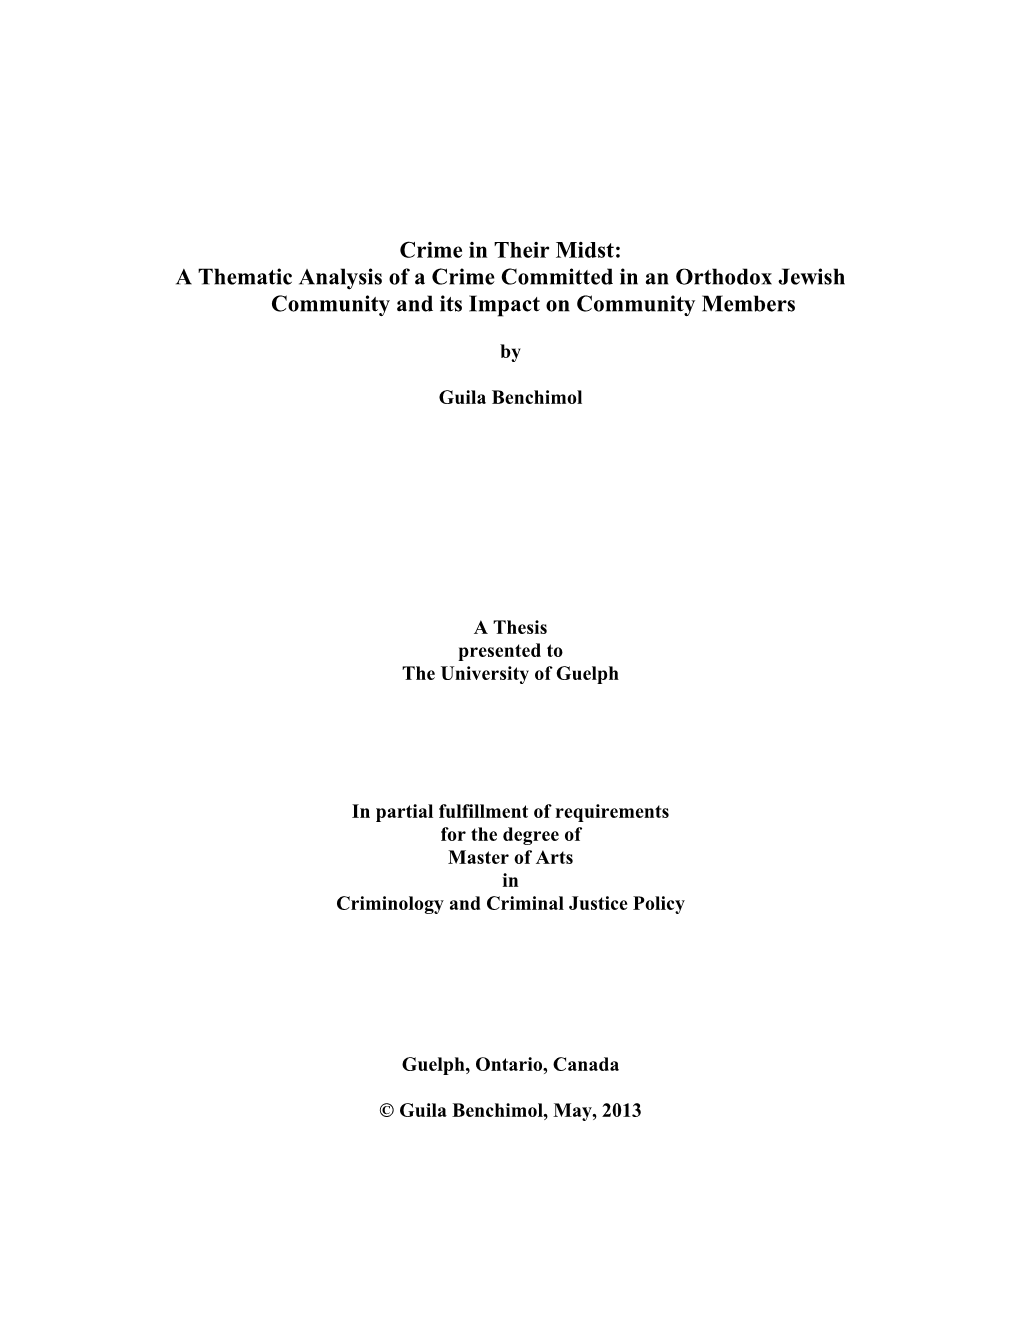 A Thematic Analysis of a Crime Committed in an Orthodox Jewish Community and Its Impact on Community Members